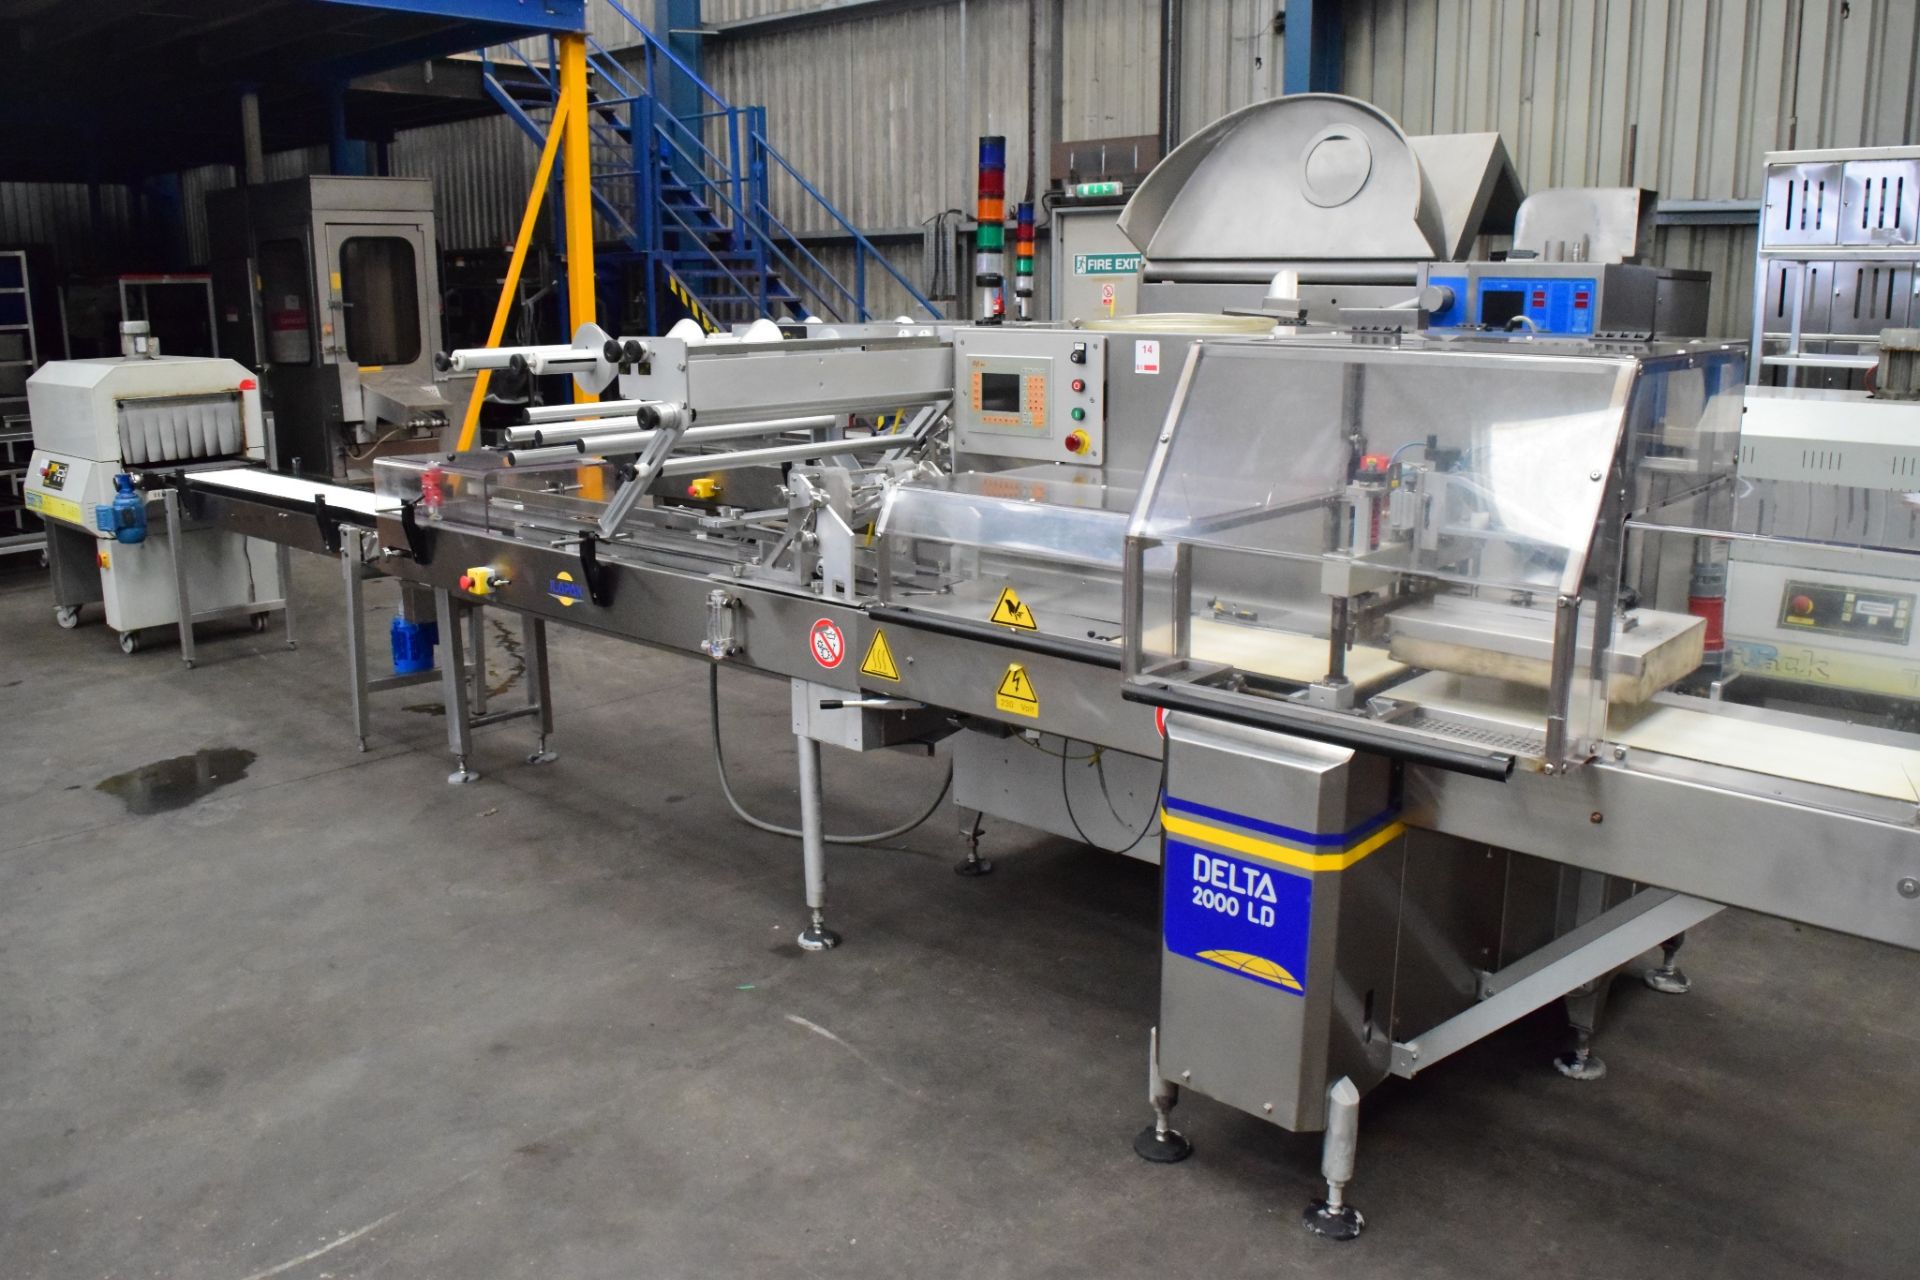 Ilapak Delta 2000LD Flowwrapper. Flexible flow wrapping machine ideally suited for a wide range of